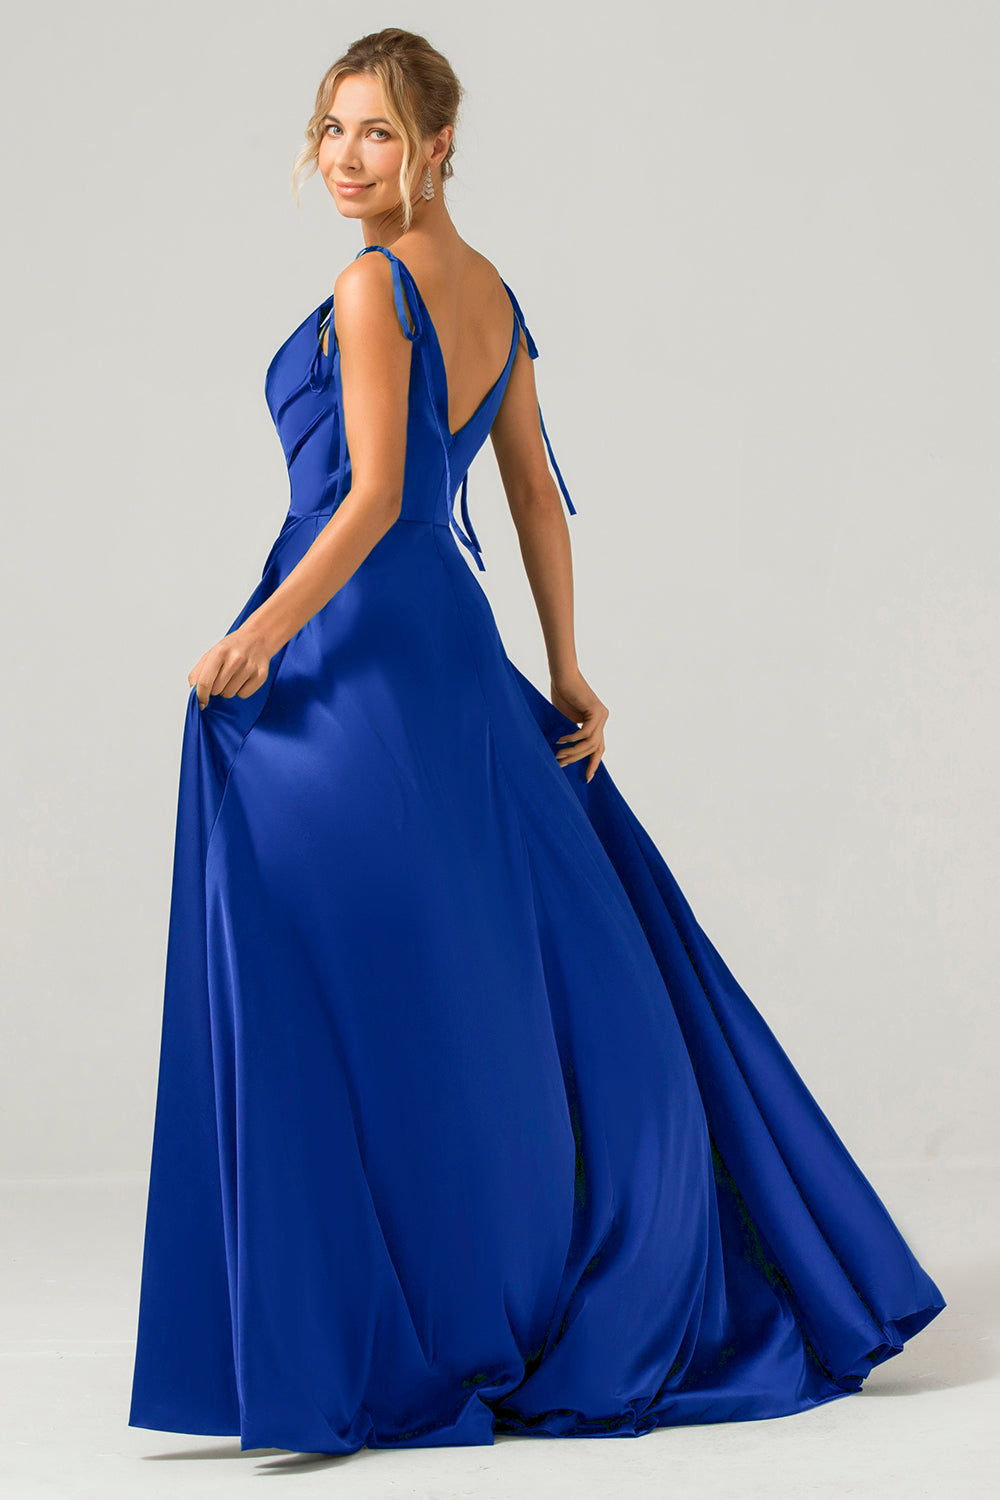 Royal Blue A-Line Spaghetti Straps Ruched Long Bridesmaid Dress with Slit